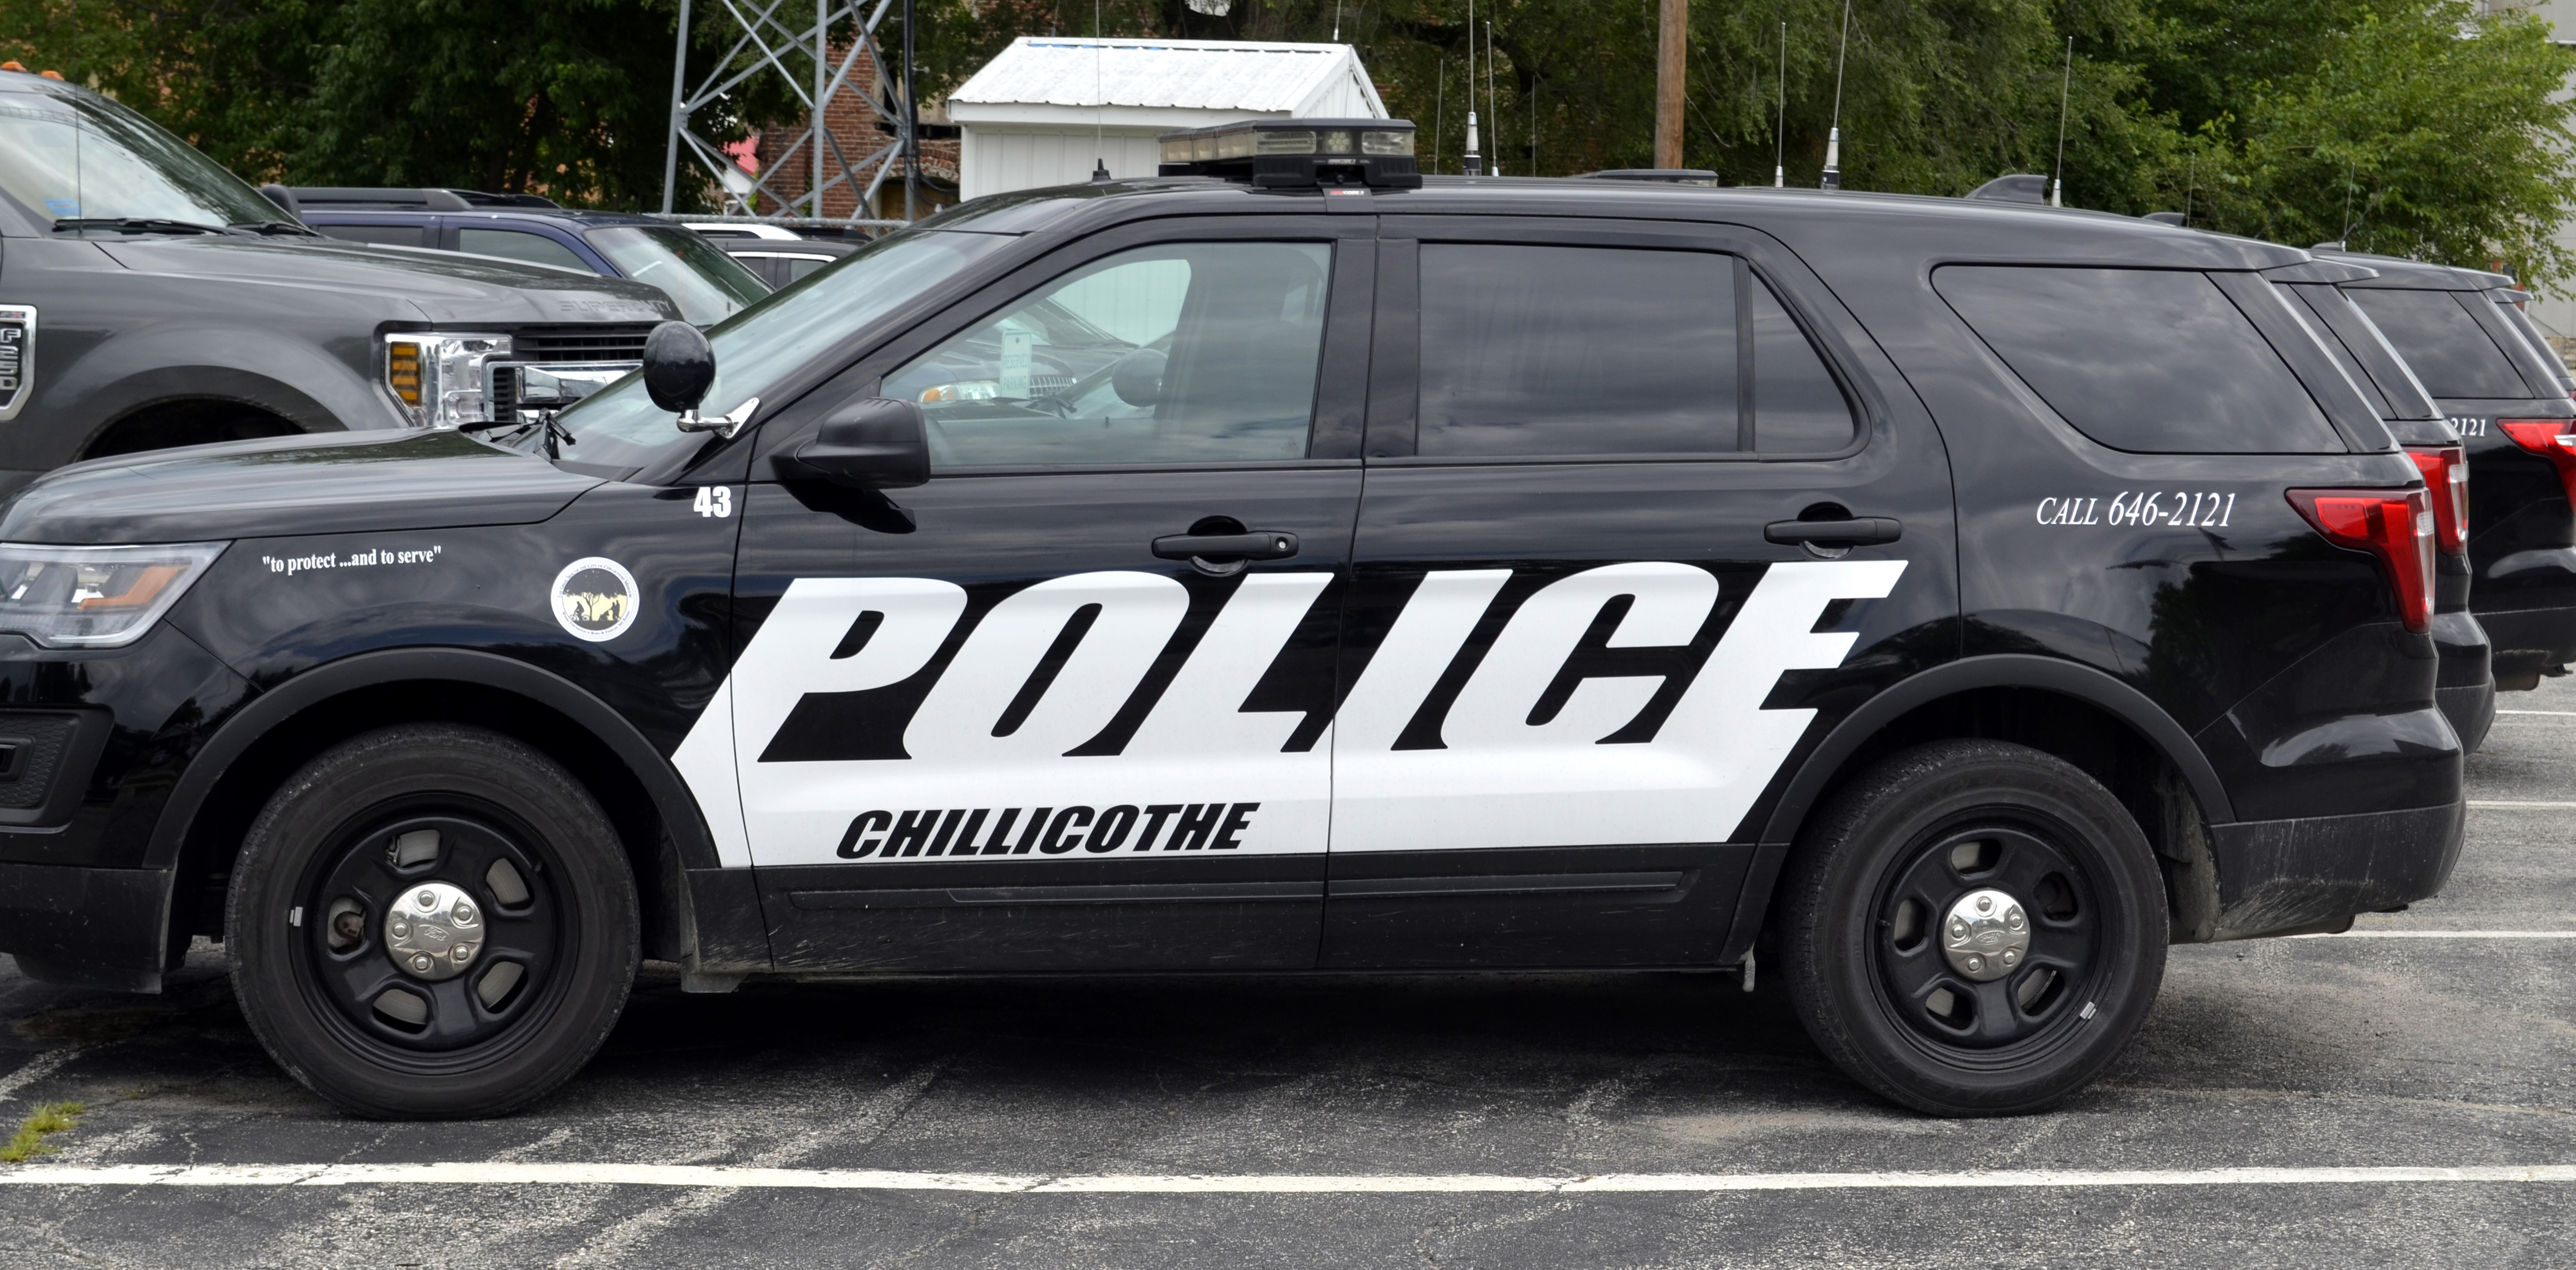 Several Investigations In Chillicothe Police Report